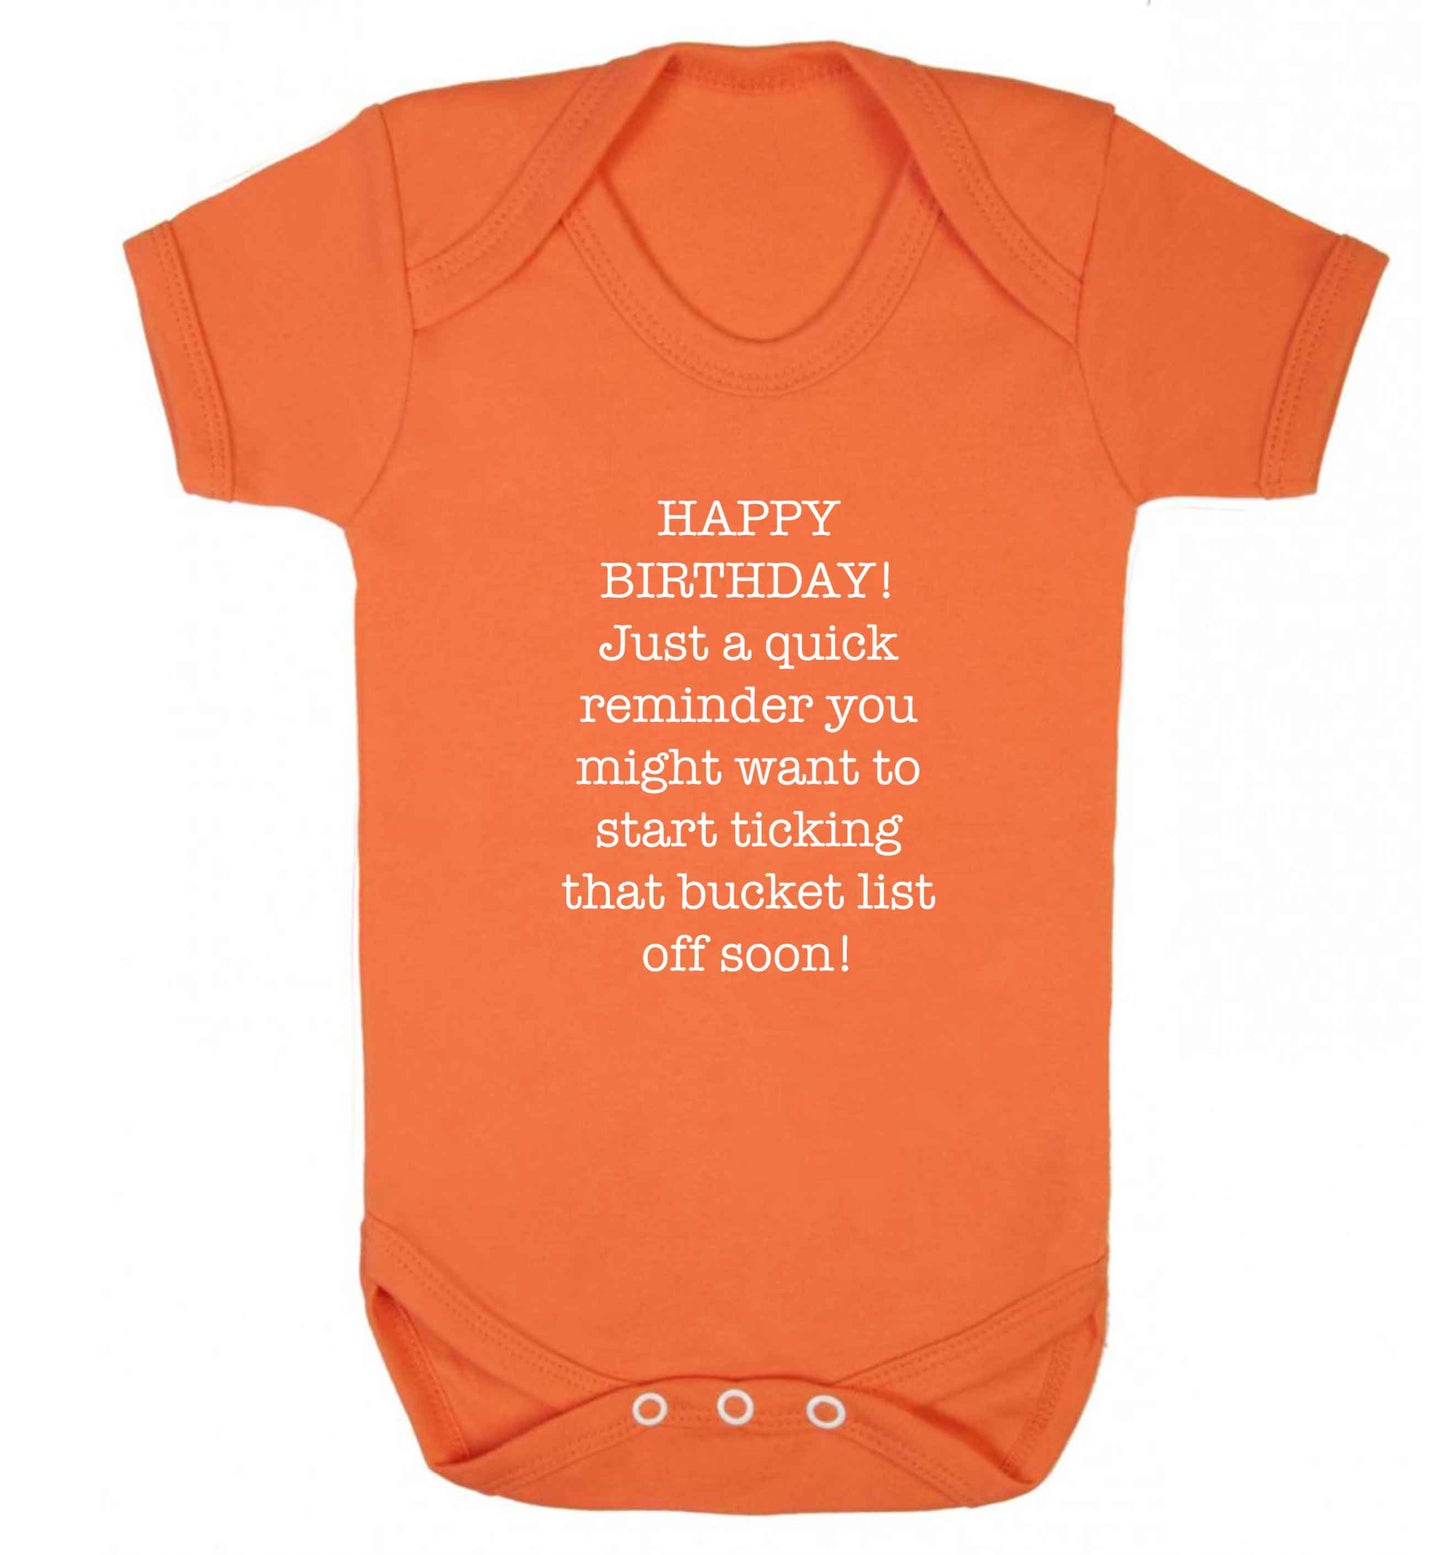 Happy birthday, just a quick reminder you might want to start ticking that bucket list off soon baby vest orange 18-24 months